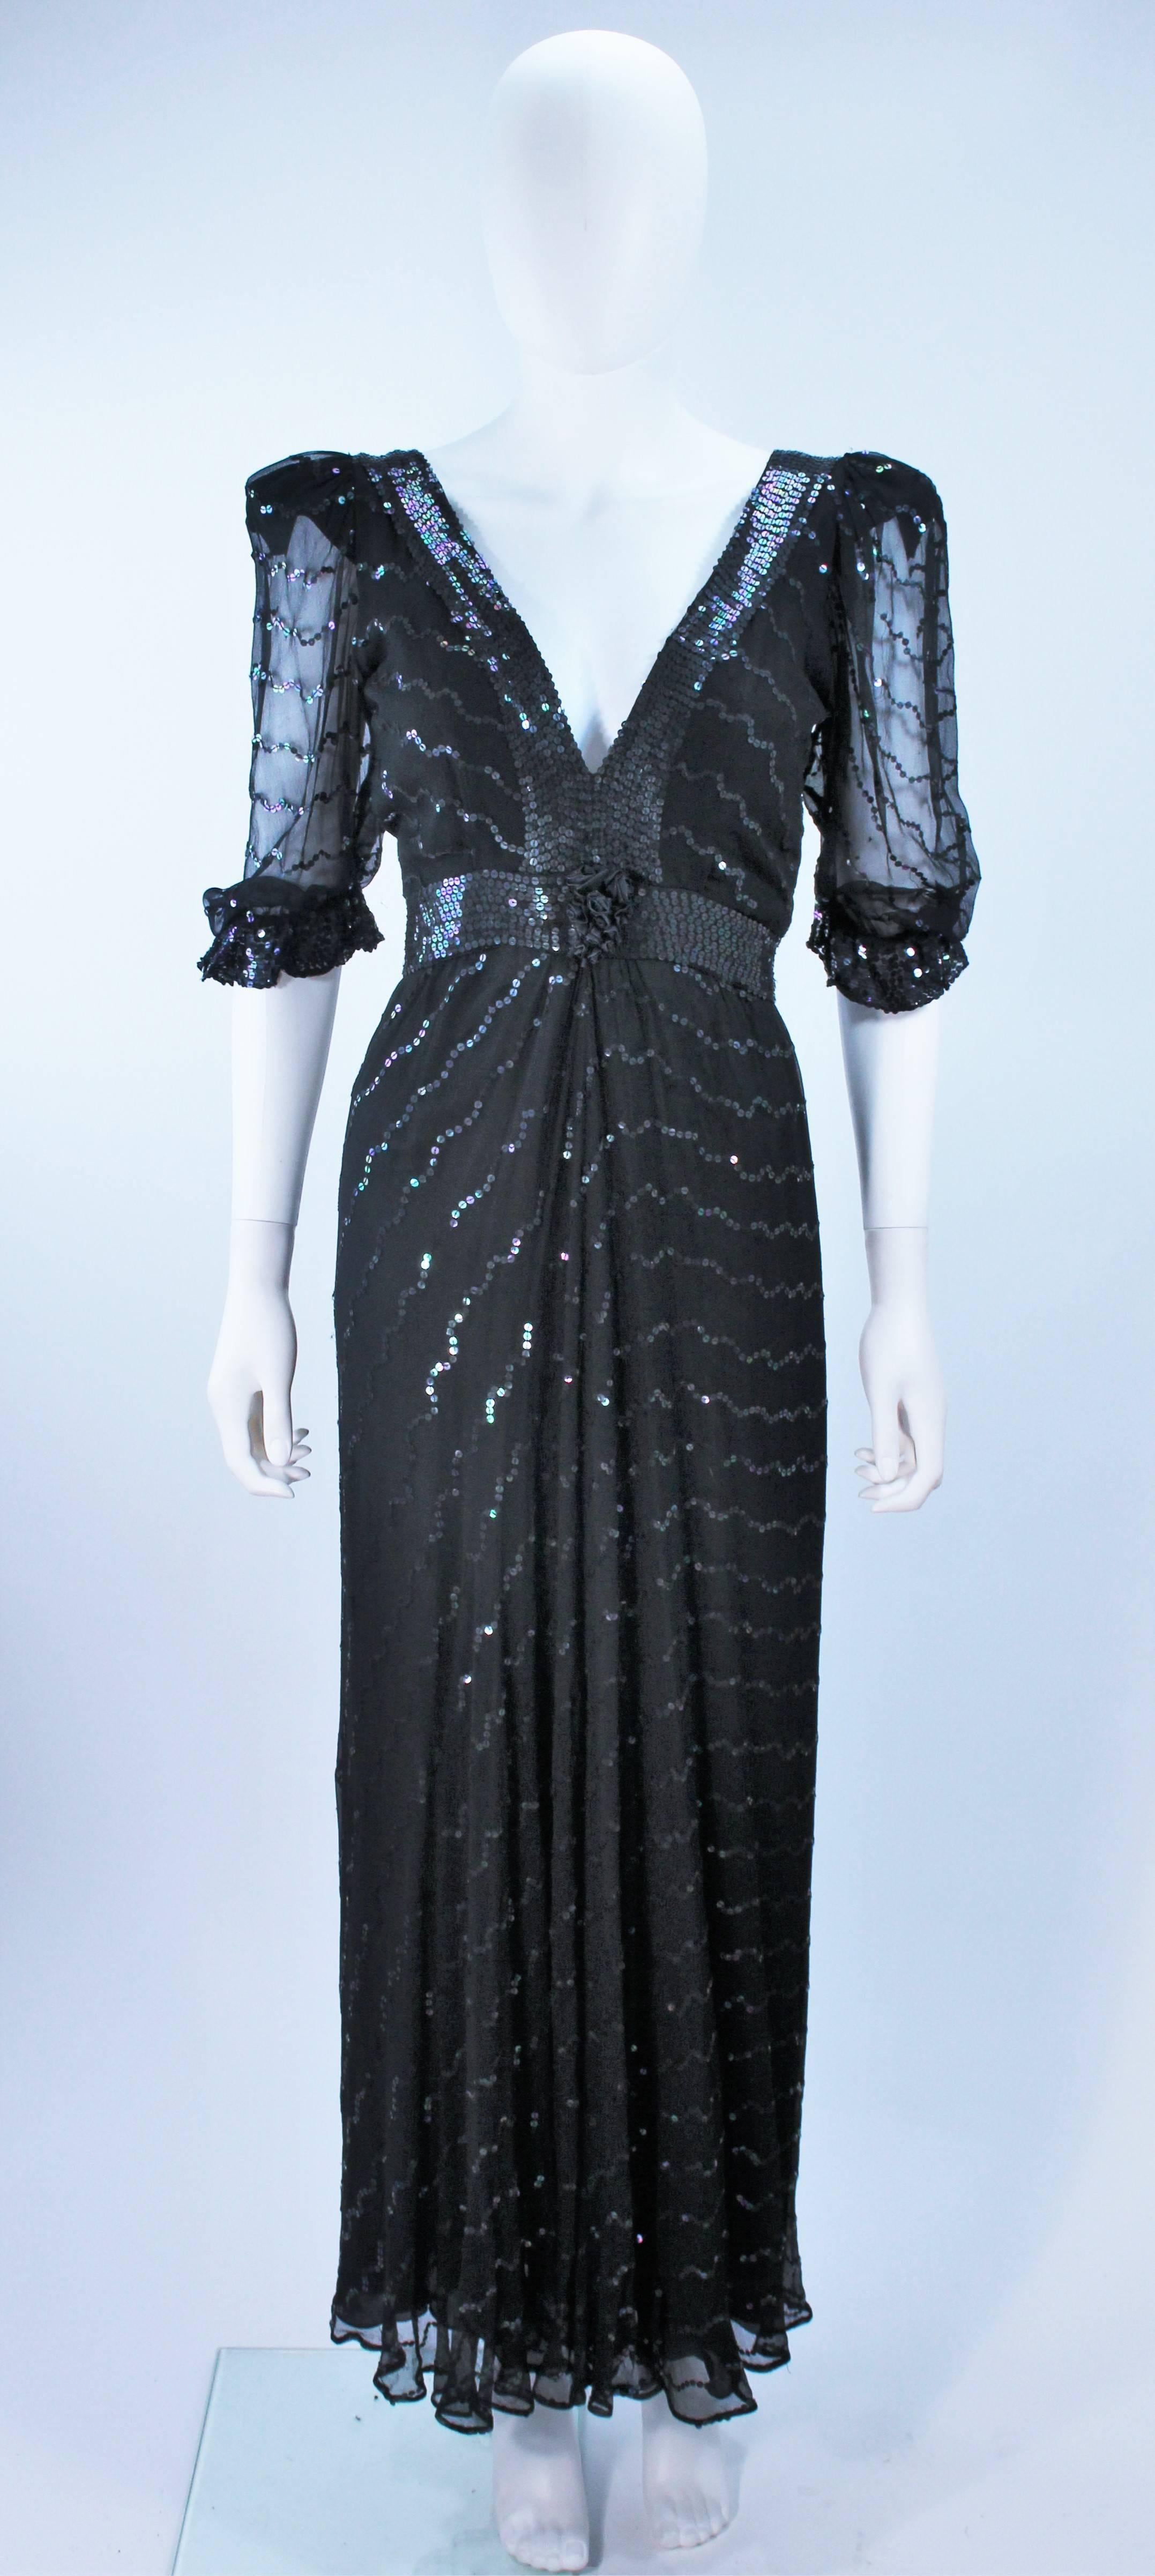  This gown is composed of a black silk chiffon with iridescent sequin applique.. The empire waist is accented by a billow sleeve and center front floral accent. In excellent vintage condition.

  **Please cross-reference measurements for personal